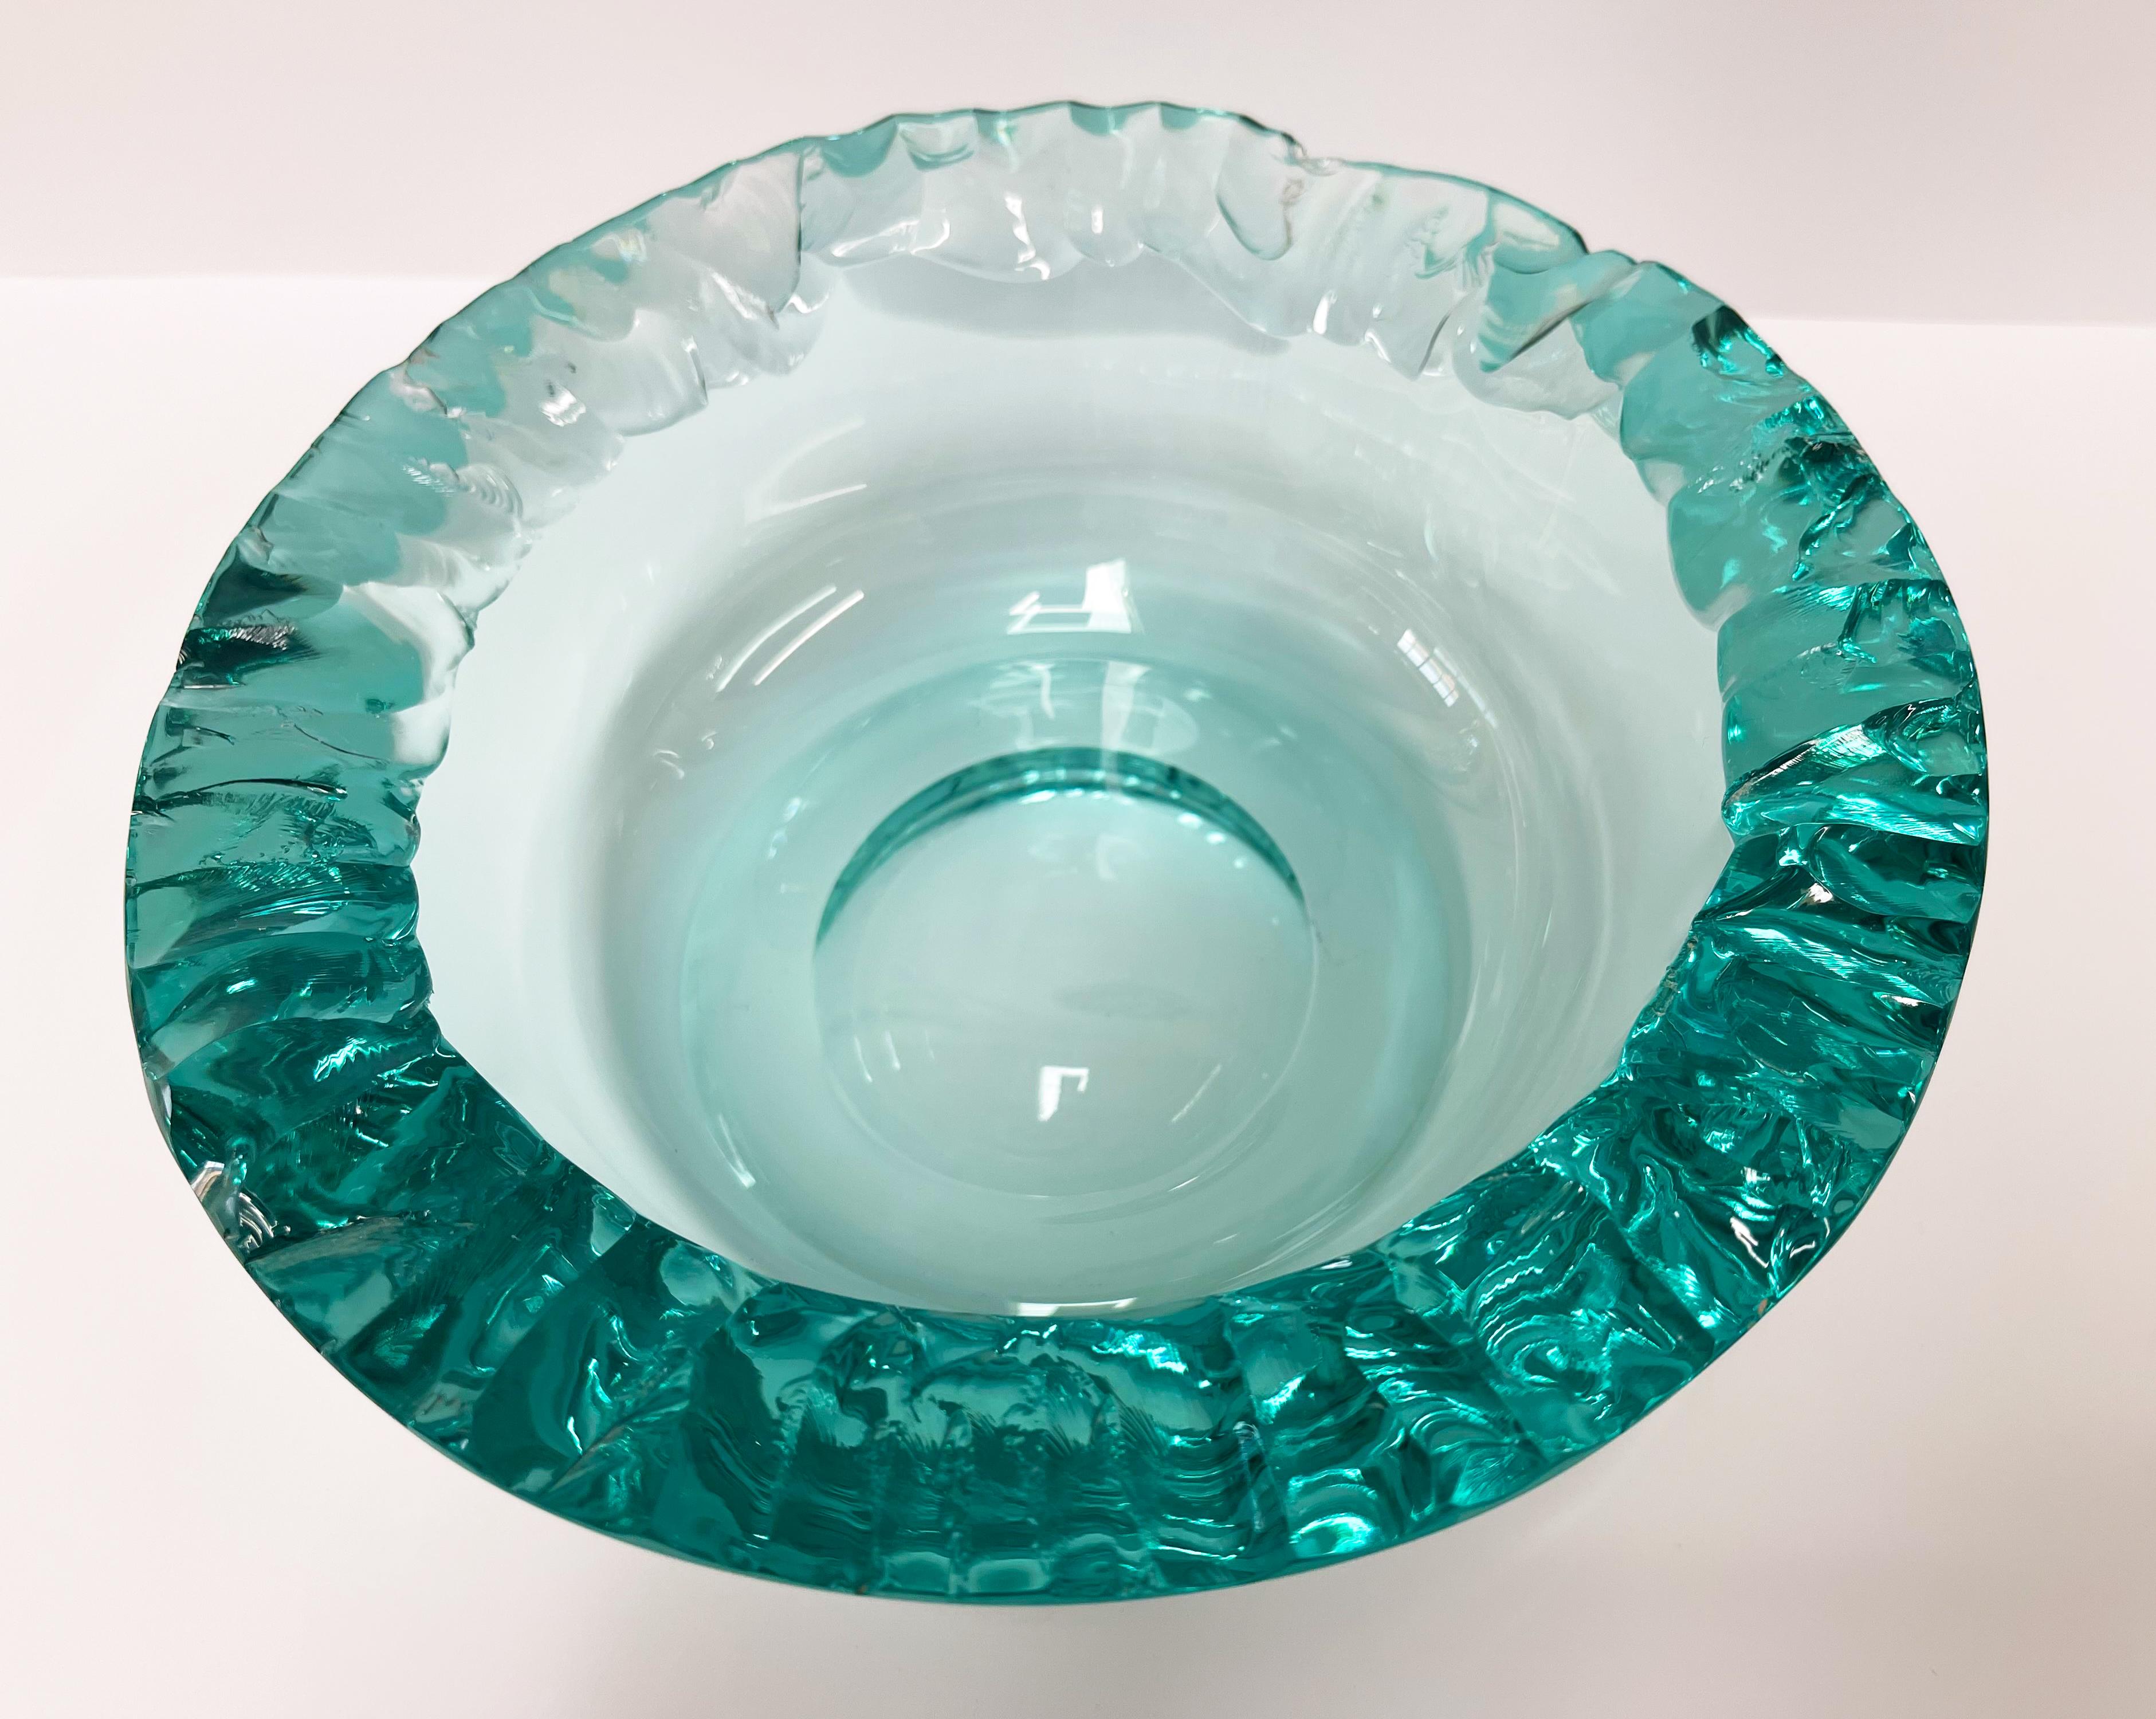 Modern Contemporary Artistic Bowl Hand Crafted Aquamarine Crystal by Ghirò Studio For Sale